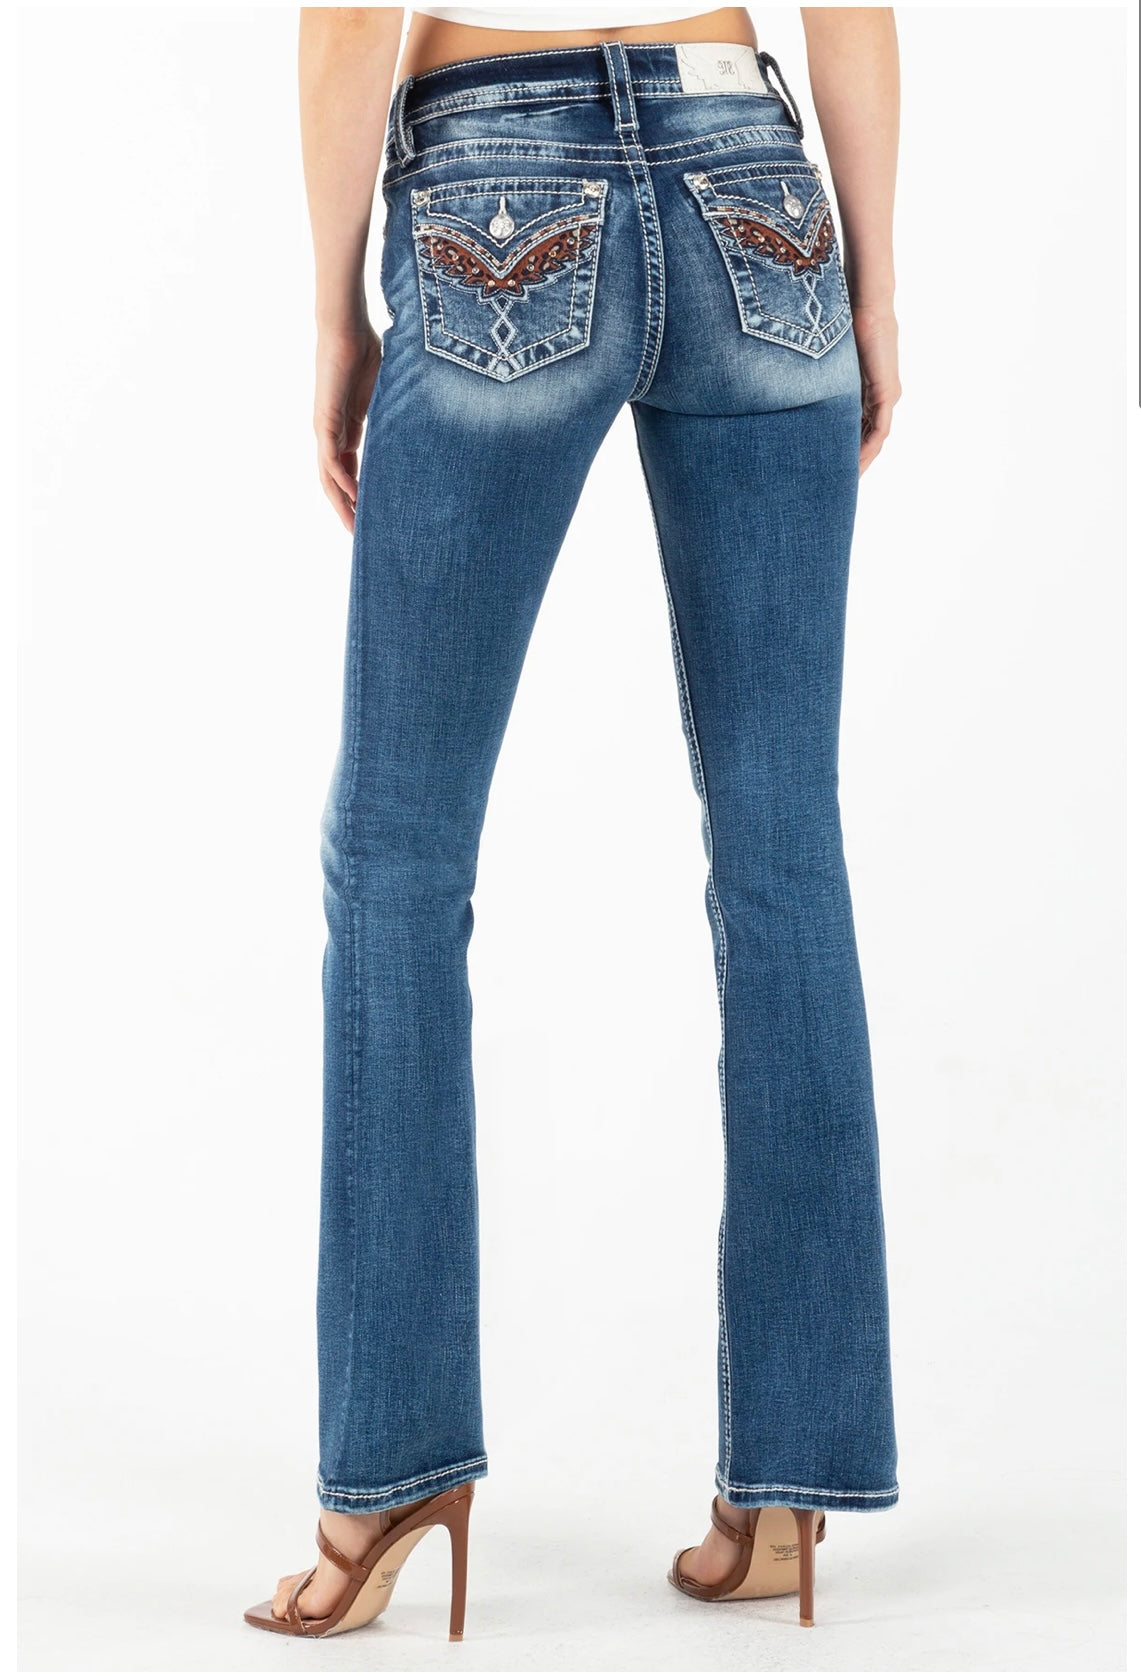 *Outlet* Miss Me Rusty Leopard Bootcut Jeans